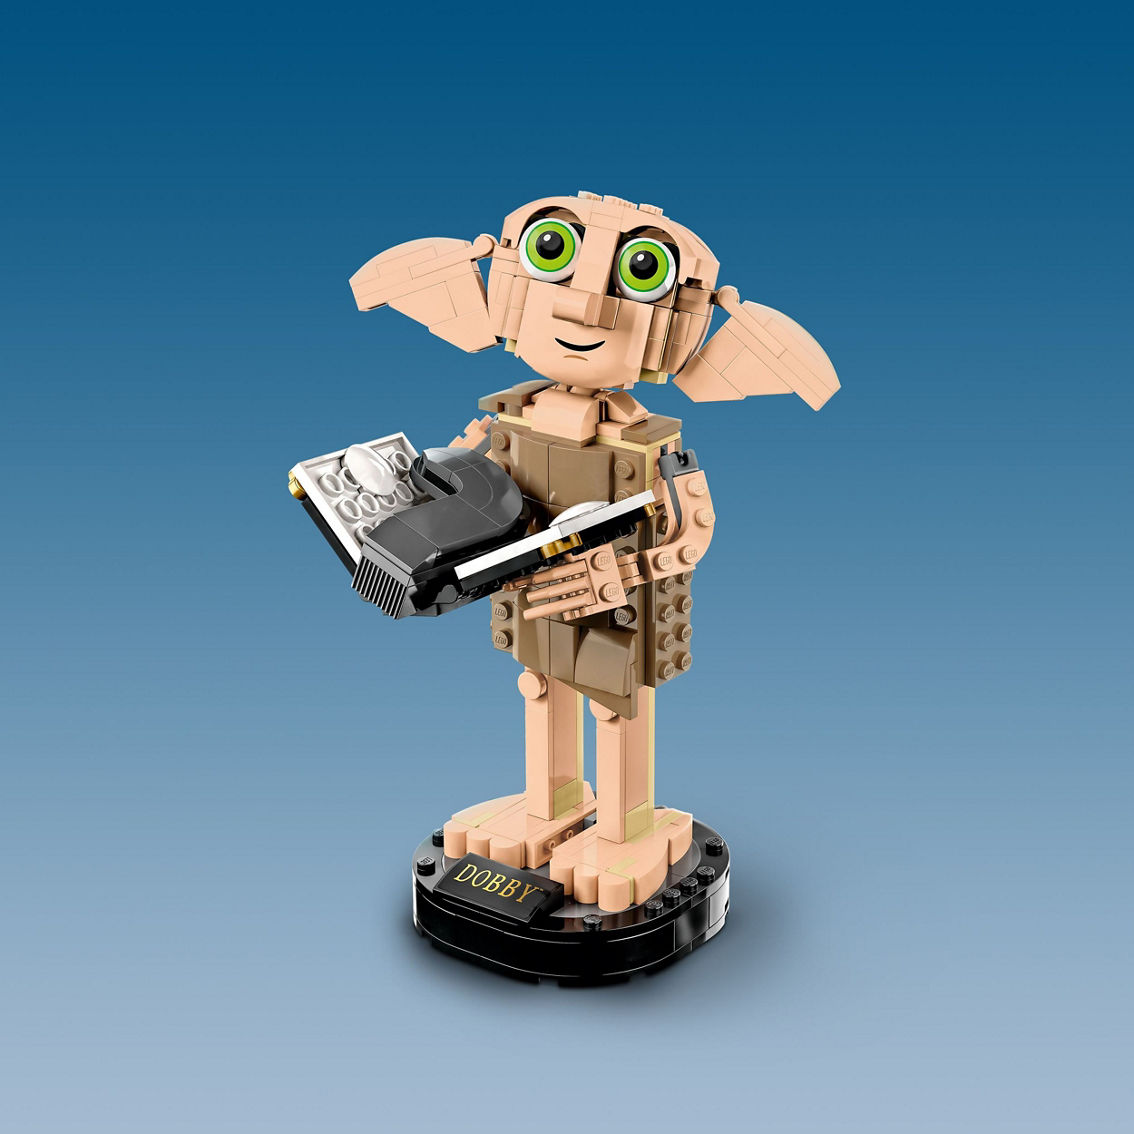 LEGO Harry Potter Dobby the House-Elf Build and Display Set 76421 - Image 7 of 10